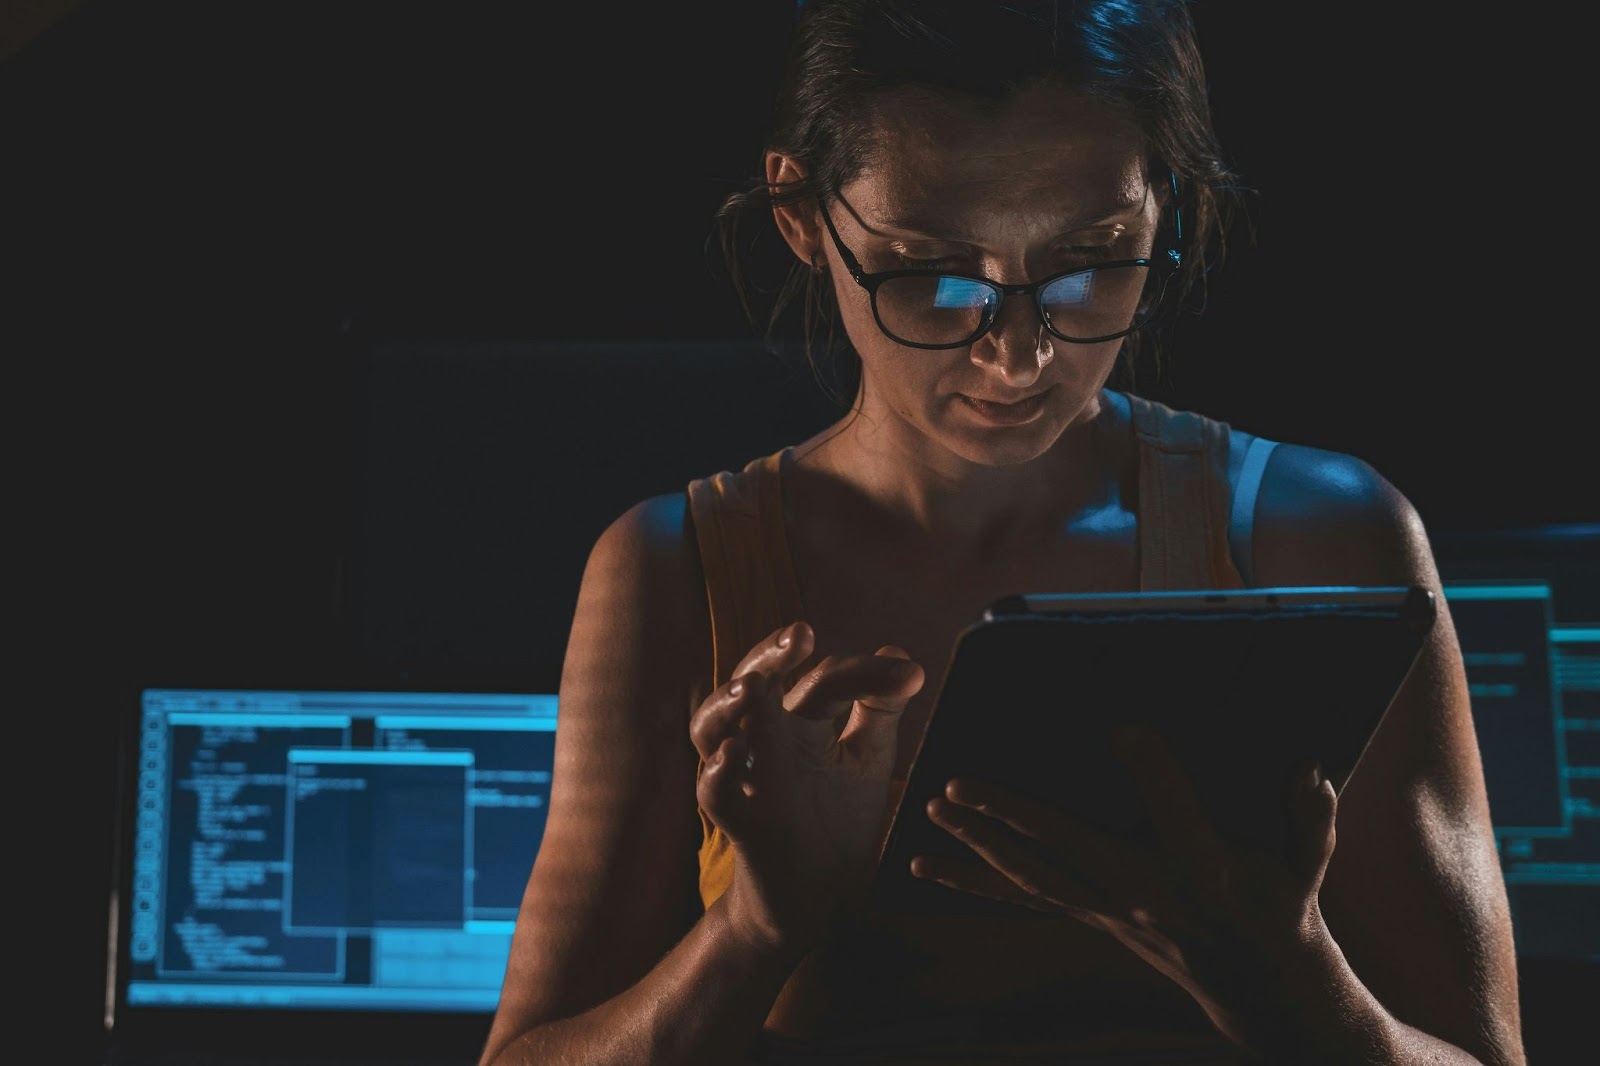 Woman looking at a tablet, with editing software in the backdrop, suggesting deepfake scam analysis